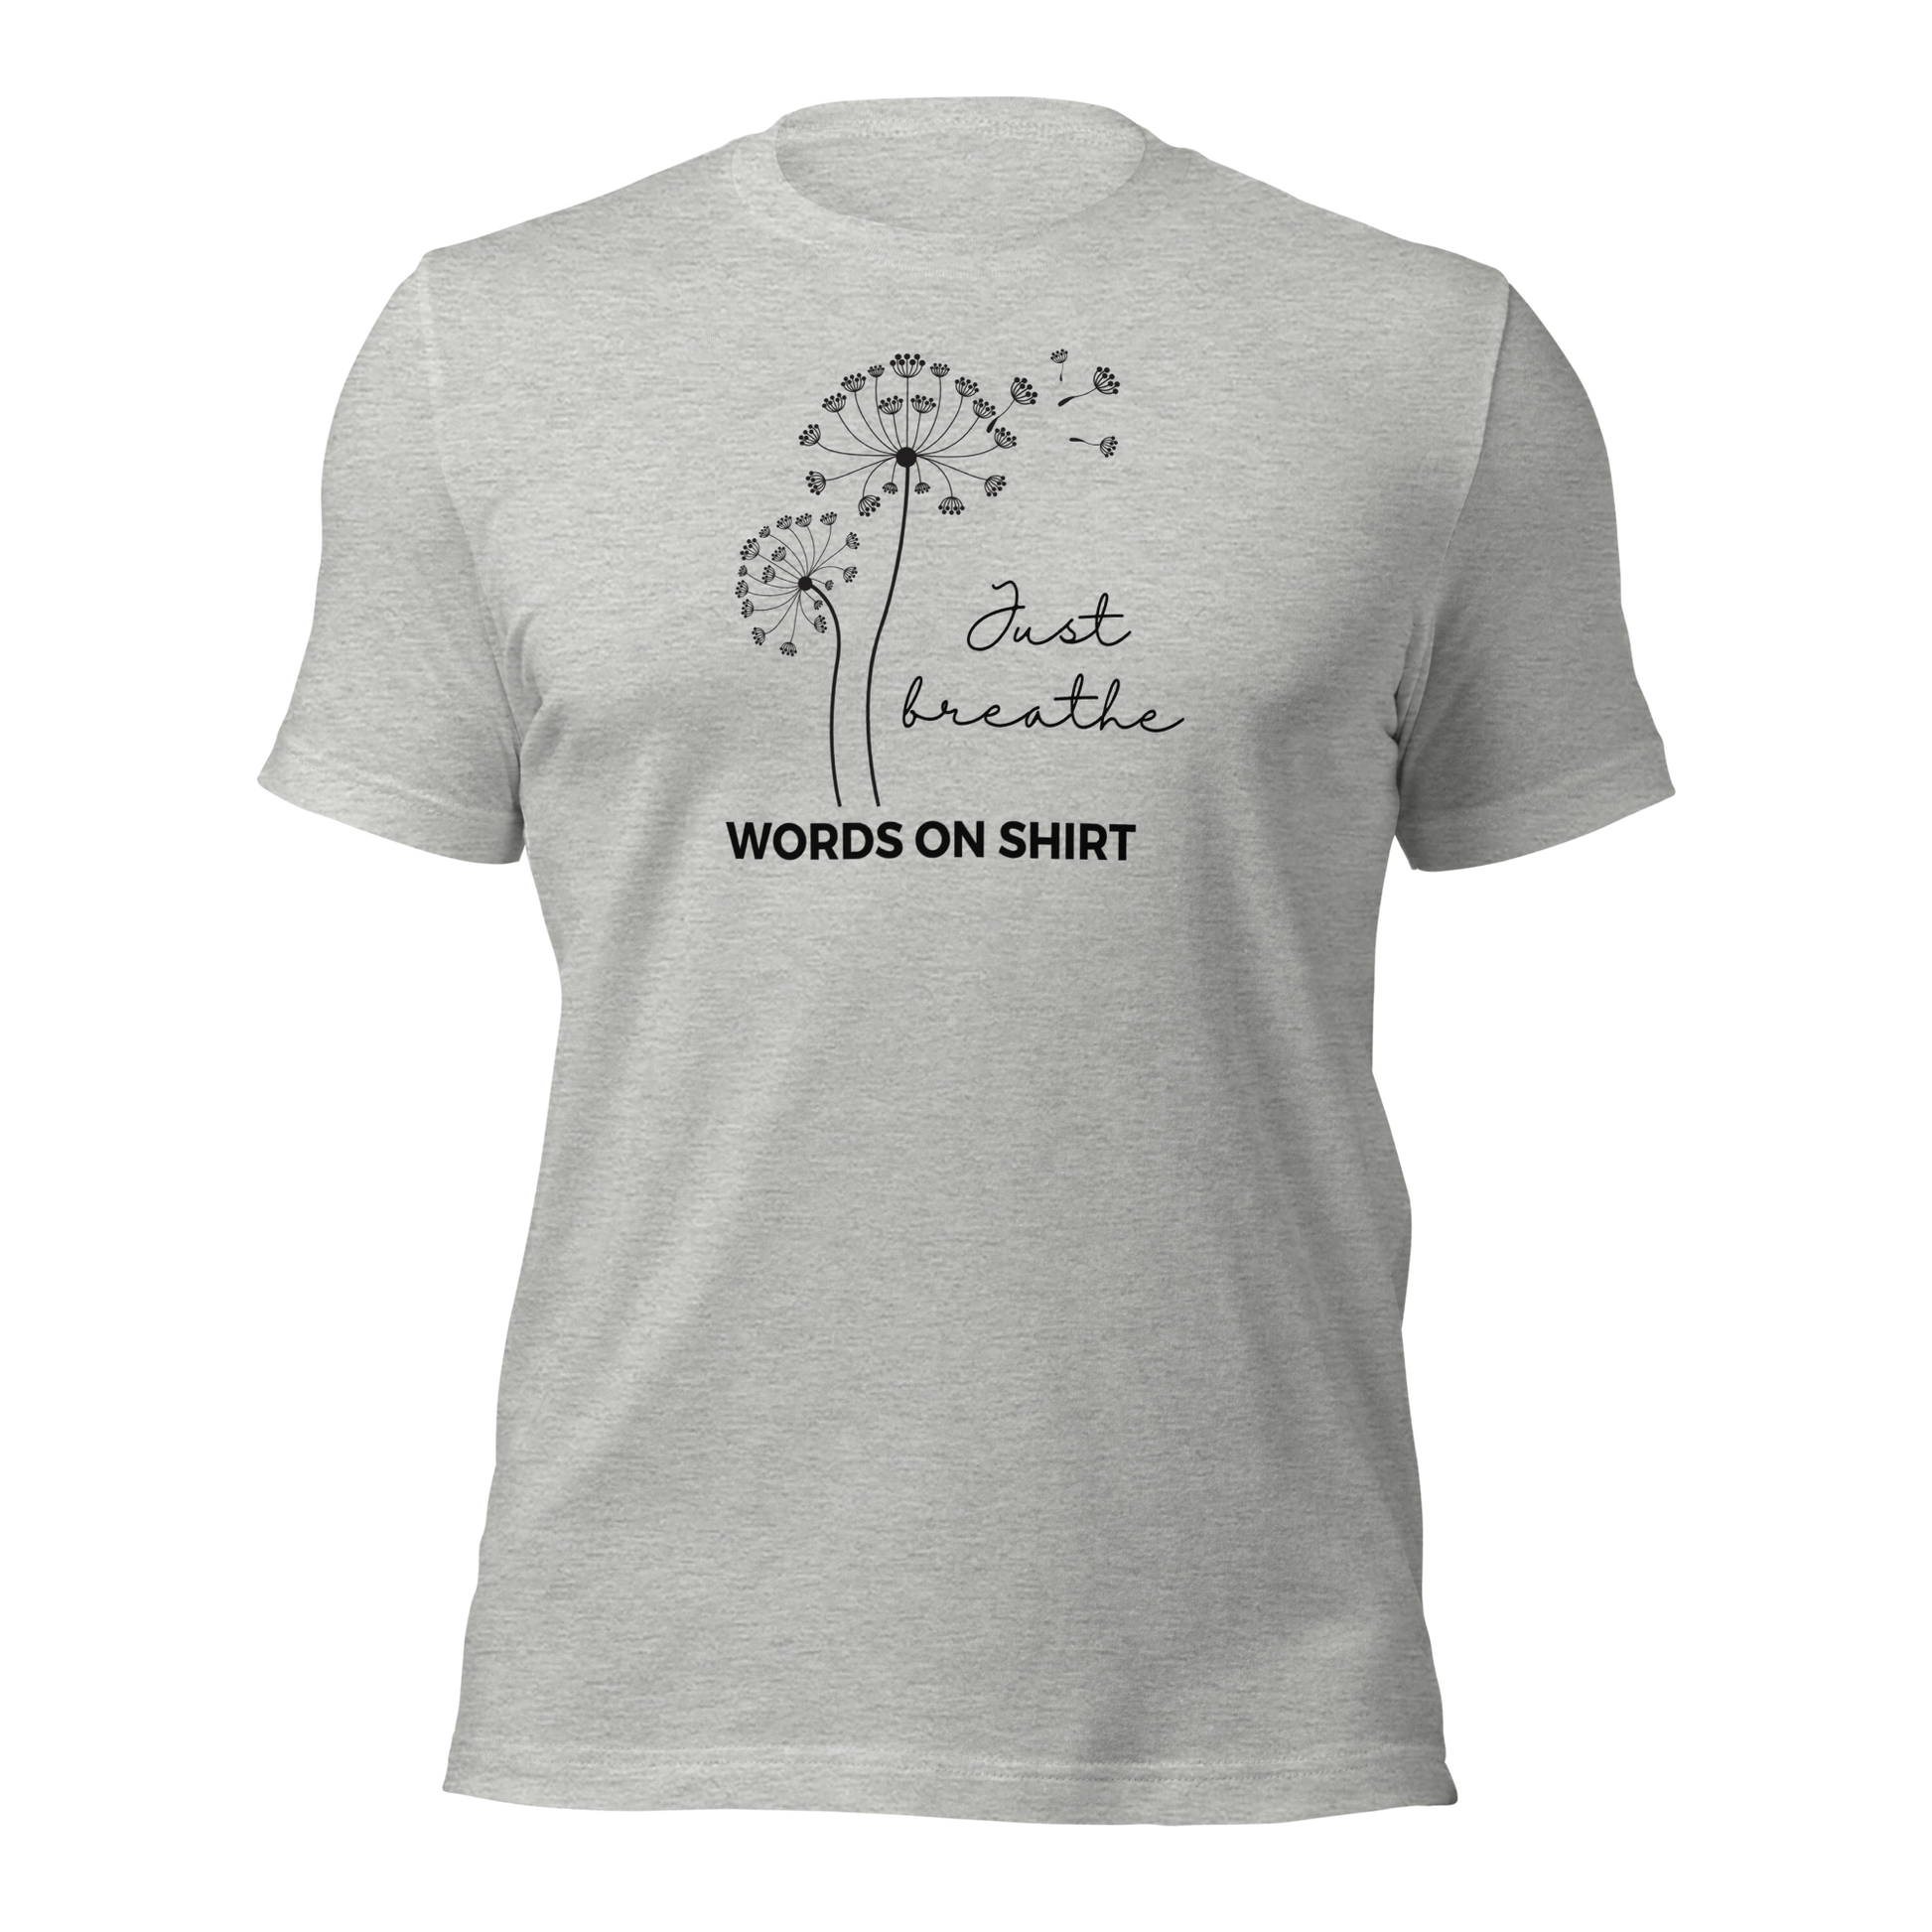 T-shirts are a dime a dozen, but this one stands out from the pack. It’s super soft, breathable, and has just the right amount of stretch. Need we say more? Just Breath!